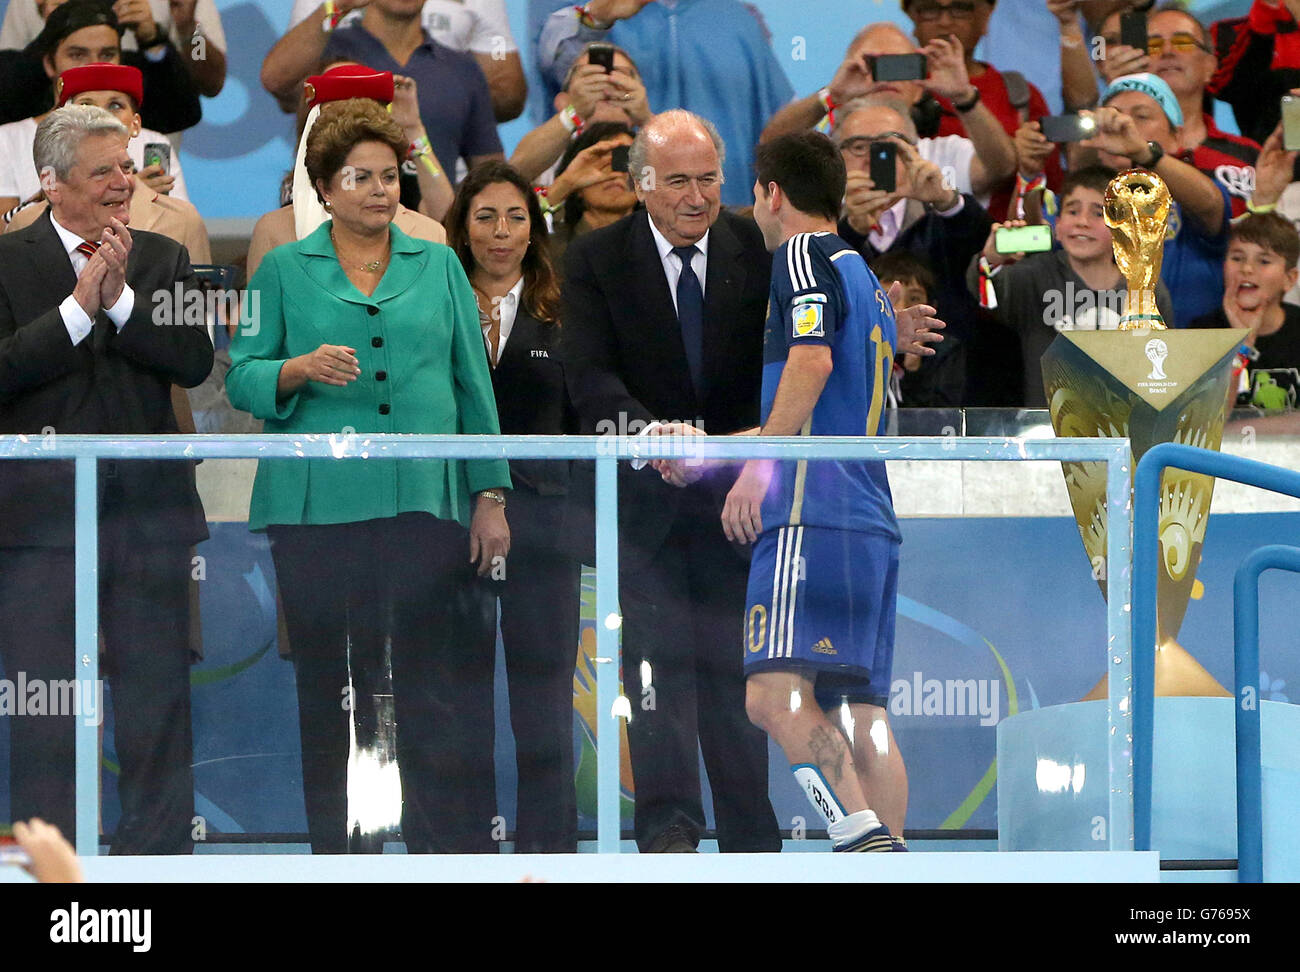 Soccer - FIFA World Cup 2014 - Final - Germany v Argentina - Estadio do Maracana. Argentina's Lionel Messi looks dejected as he collects his Golden Ball award from FIFA President Sepp Blatter Stock Photo